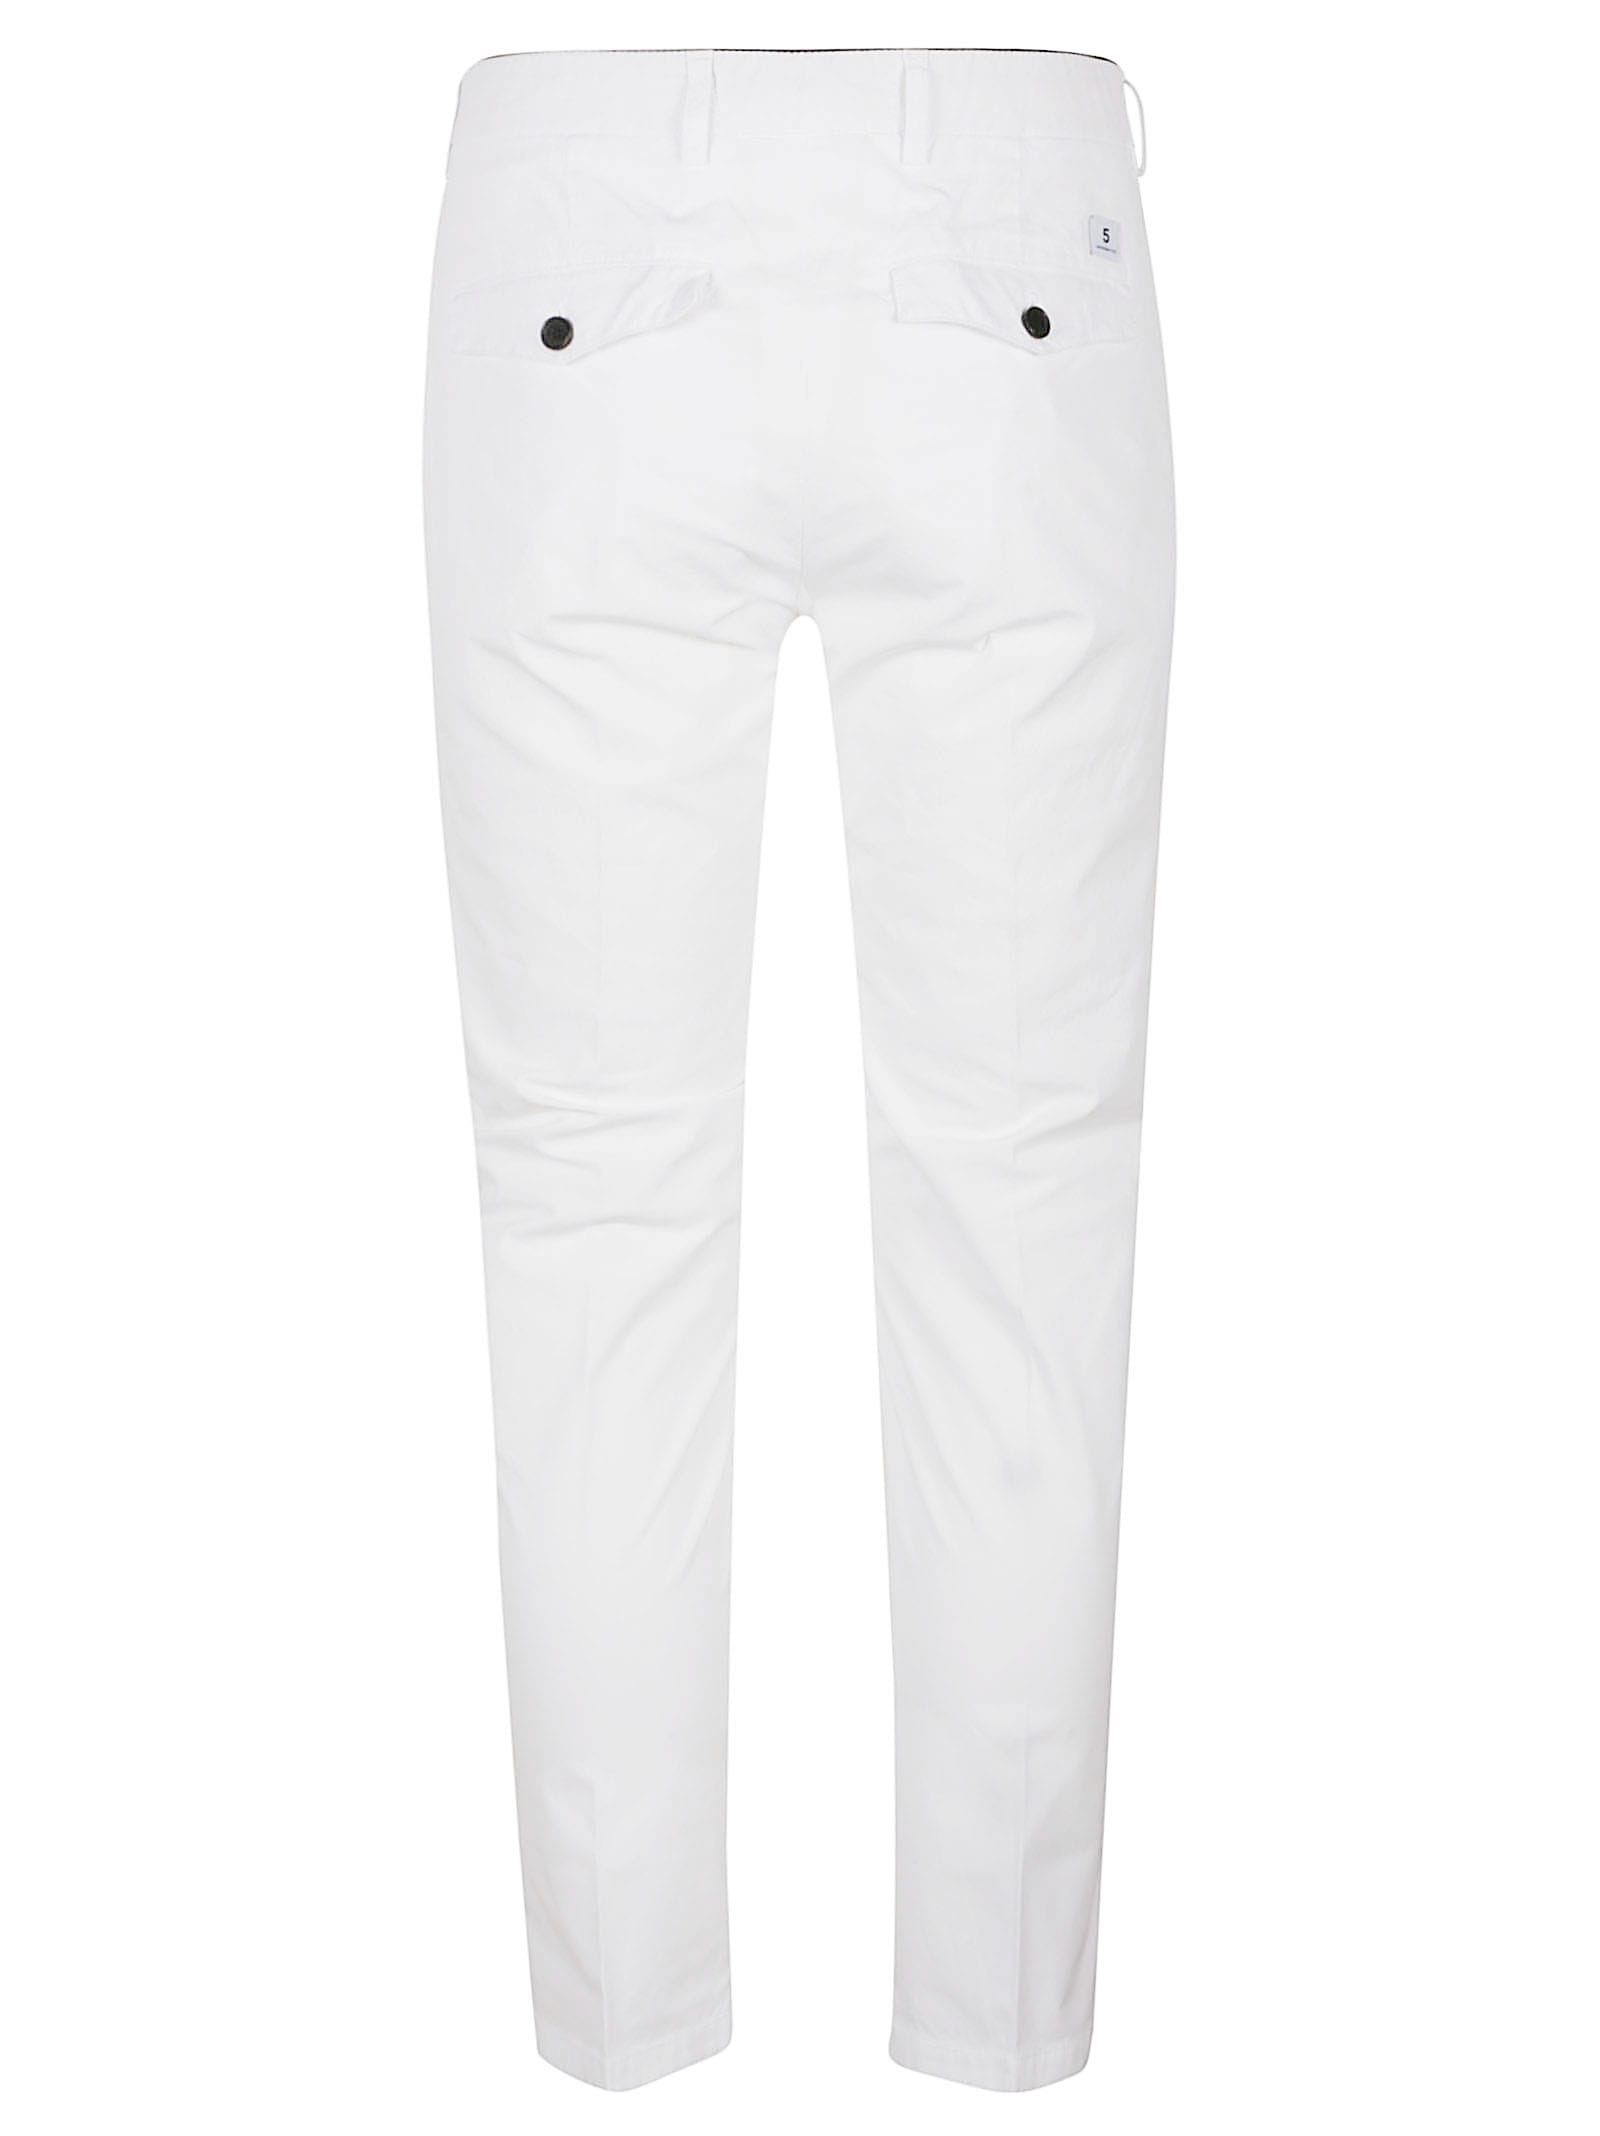 Shop Department Five Prince Pences Chinos Pant In Bianco Ottico